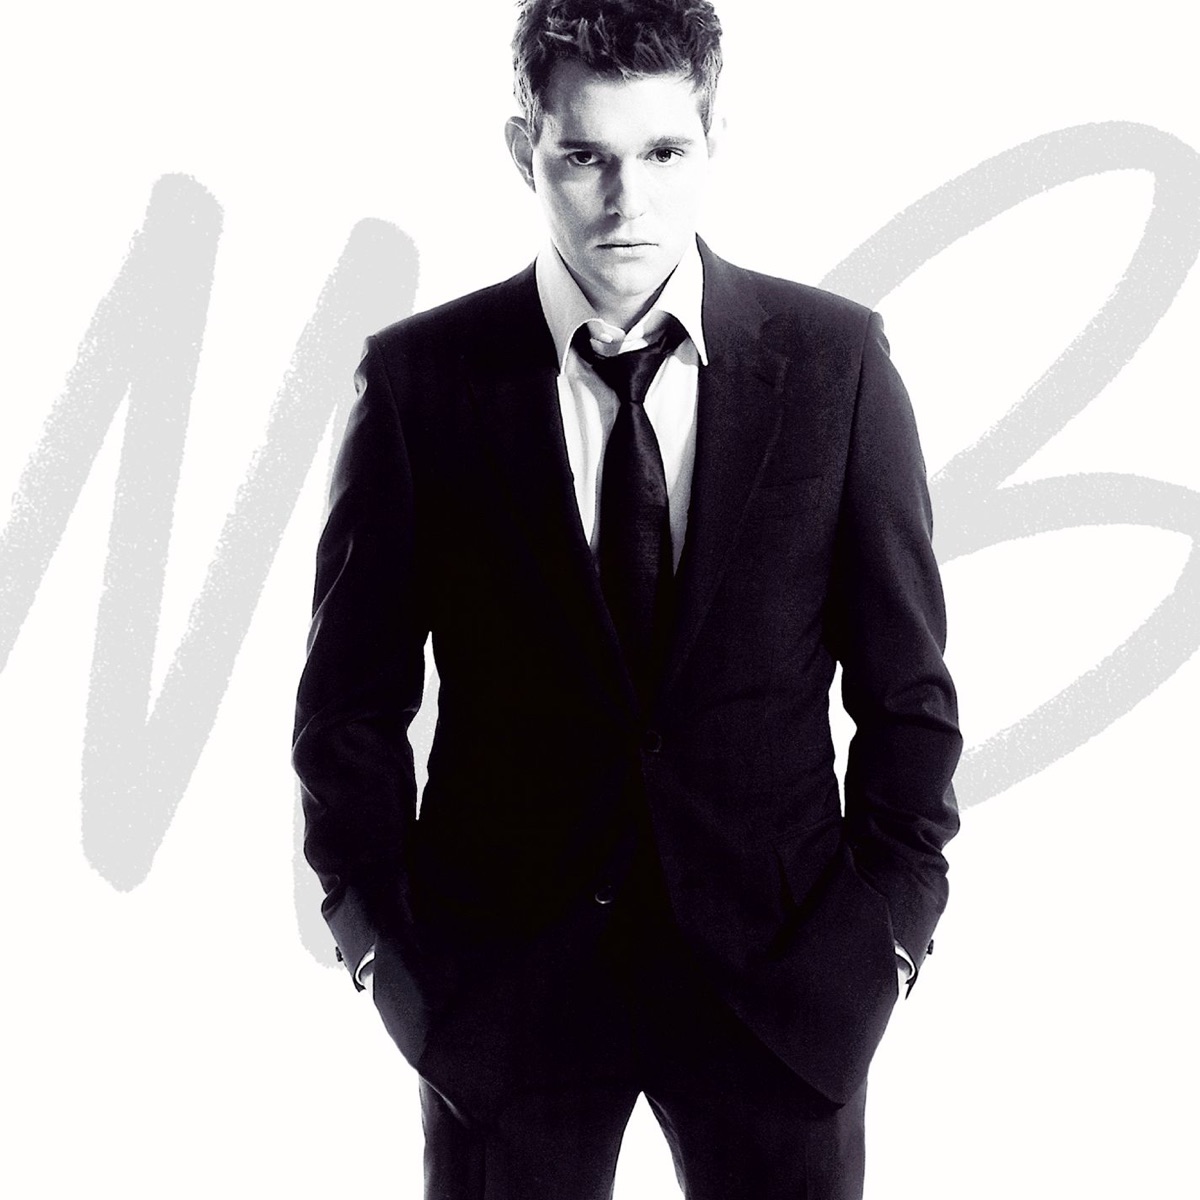 Christmas by Michael Bublé on Apple Music